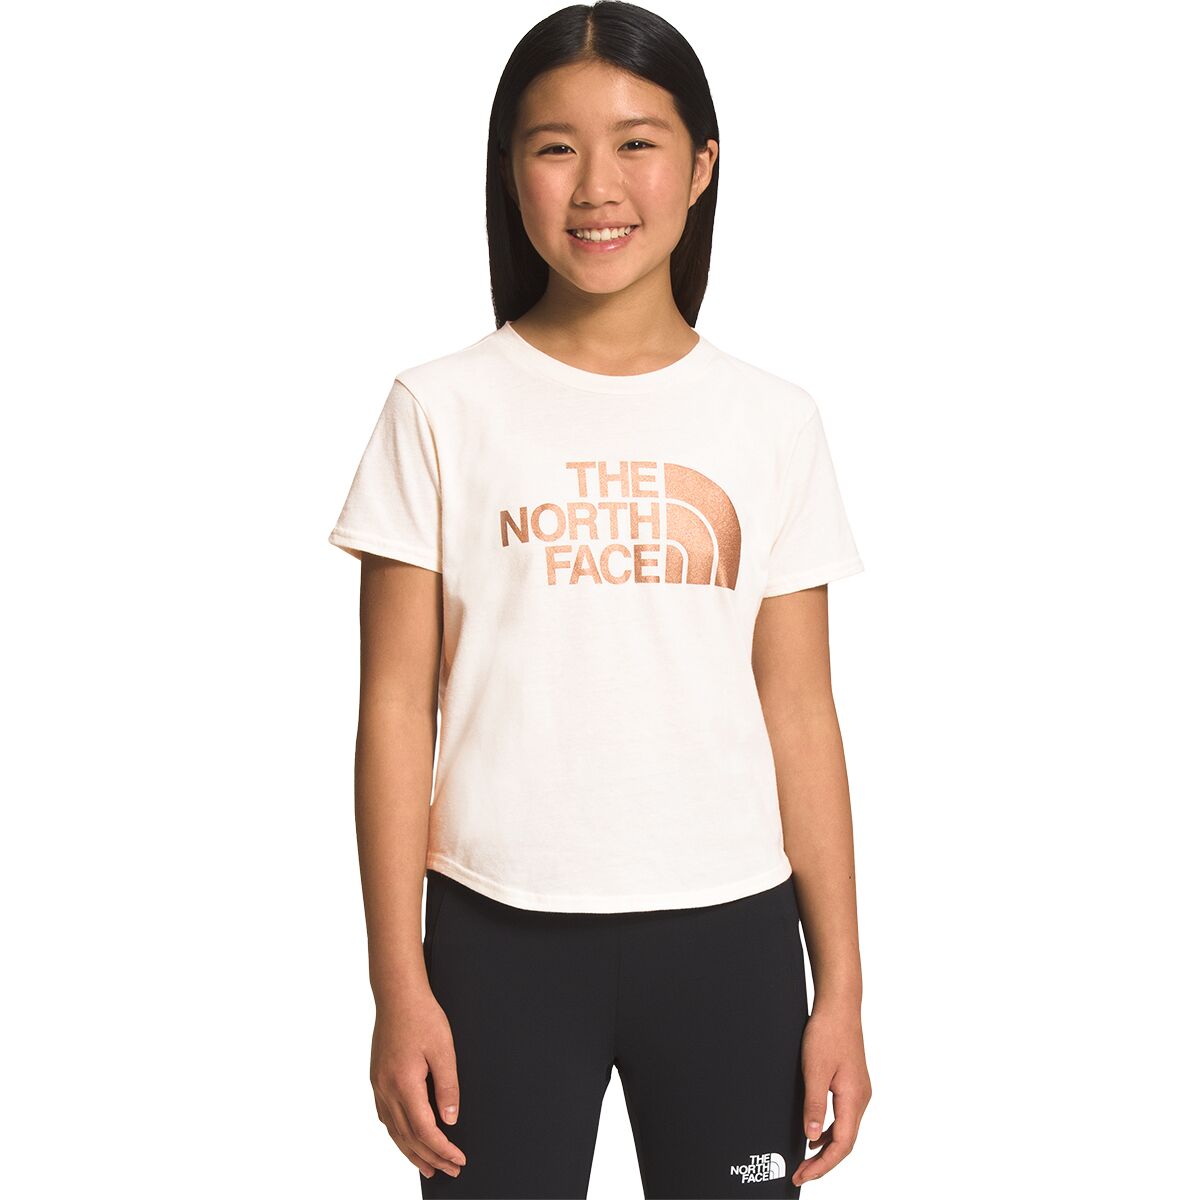 The North Face Graphic Short-Sleeve T-Shirt - Girls'